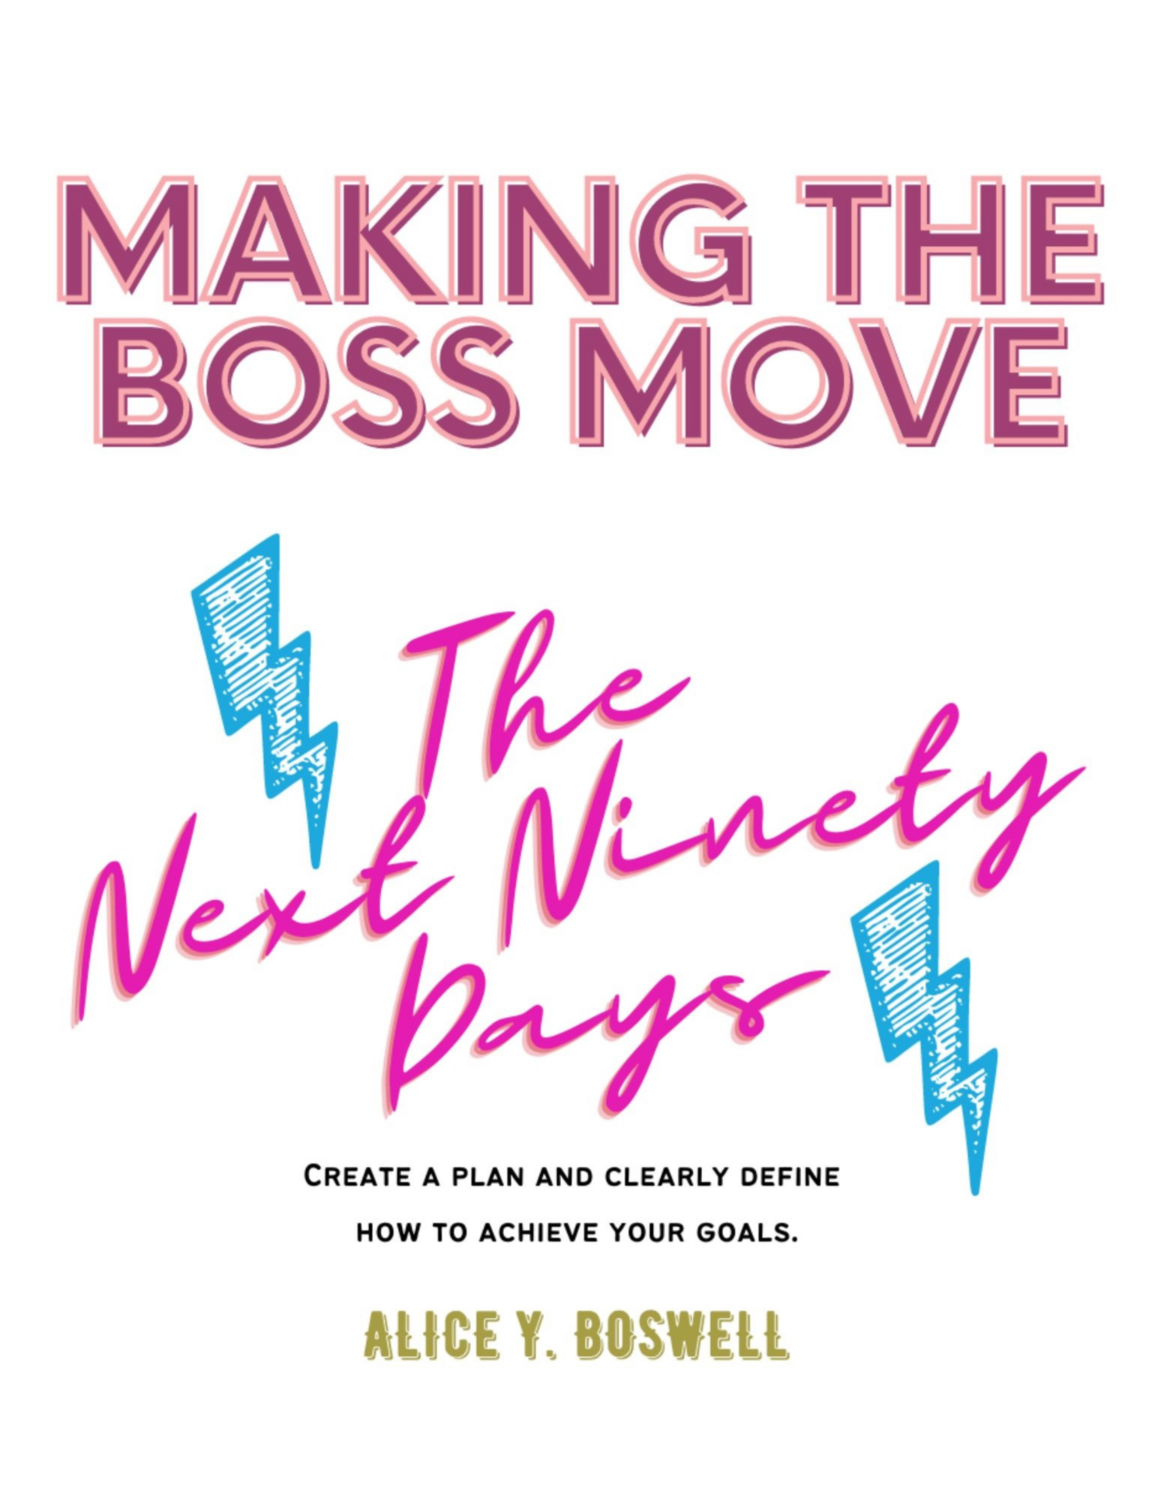 Making the Boss Move: The Next Ninety Days